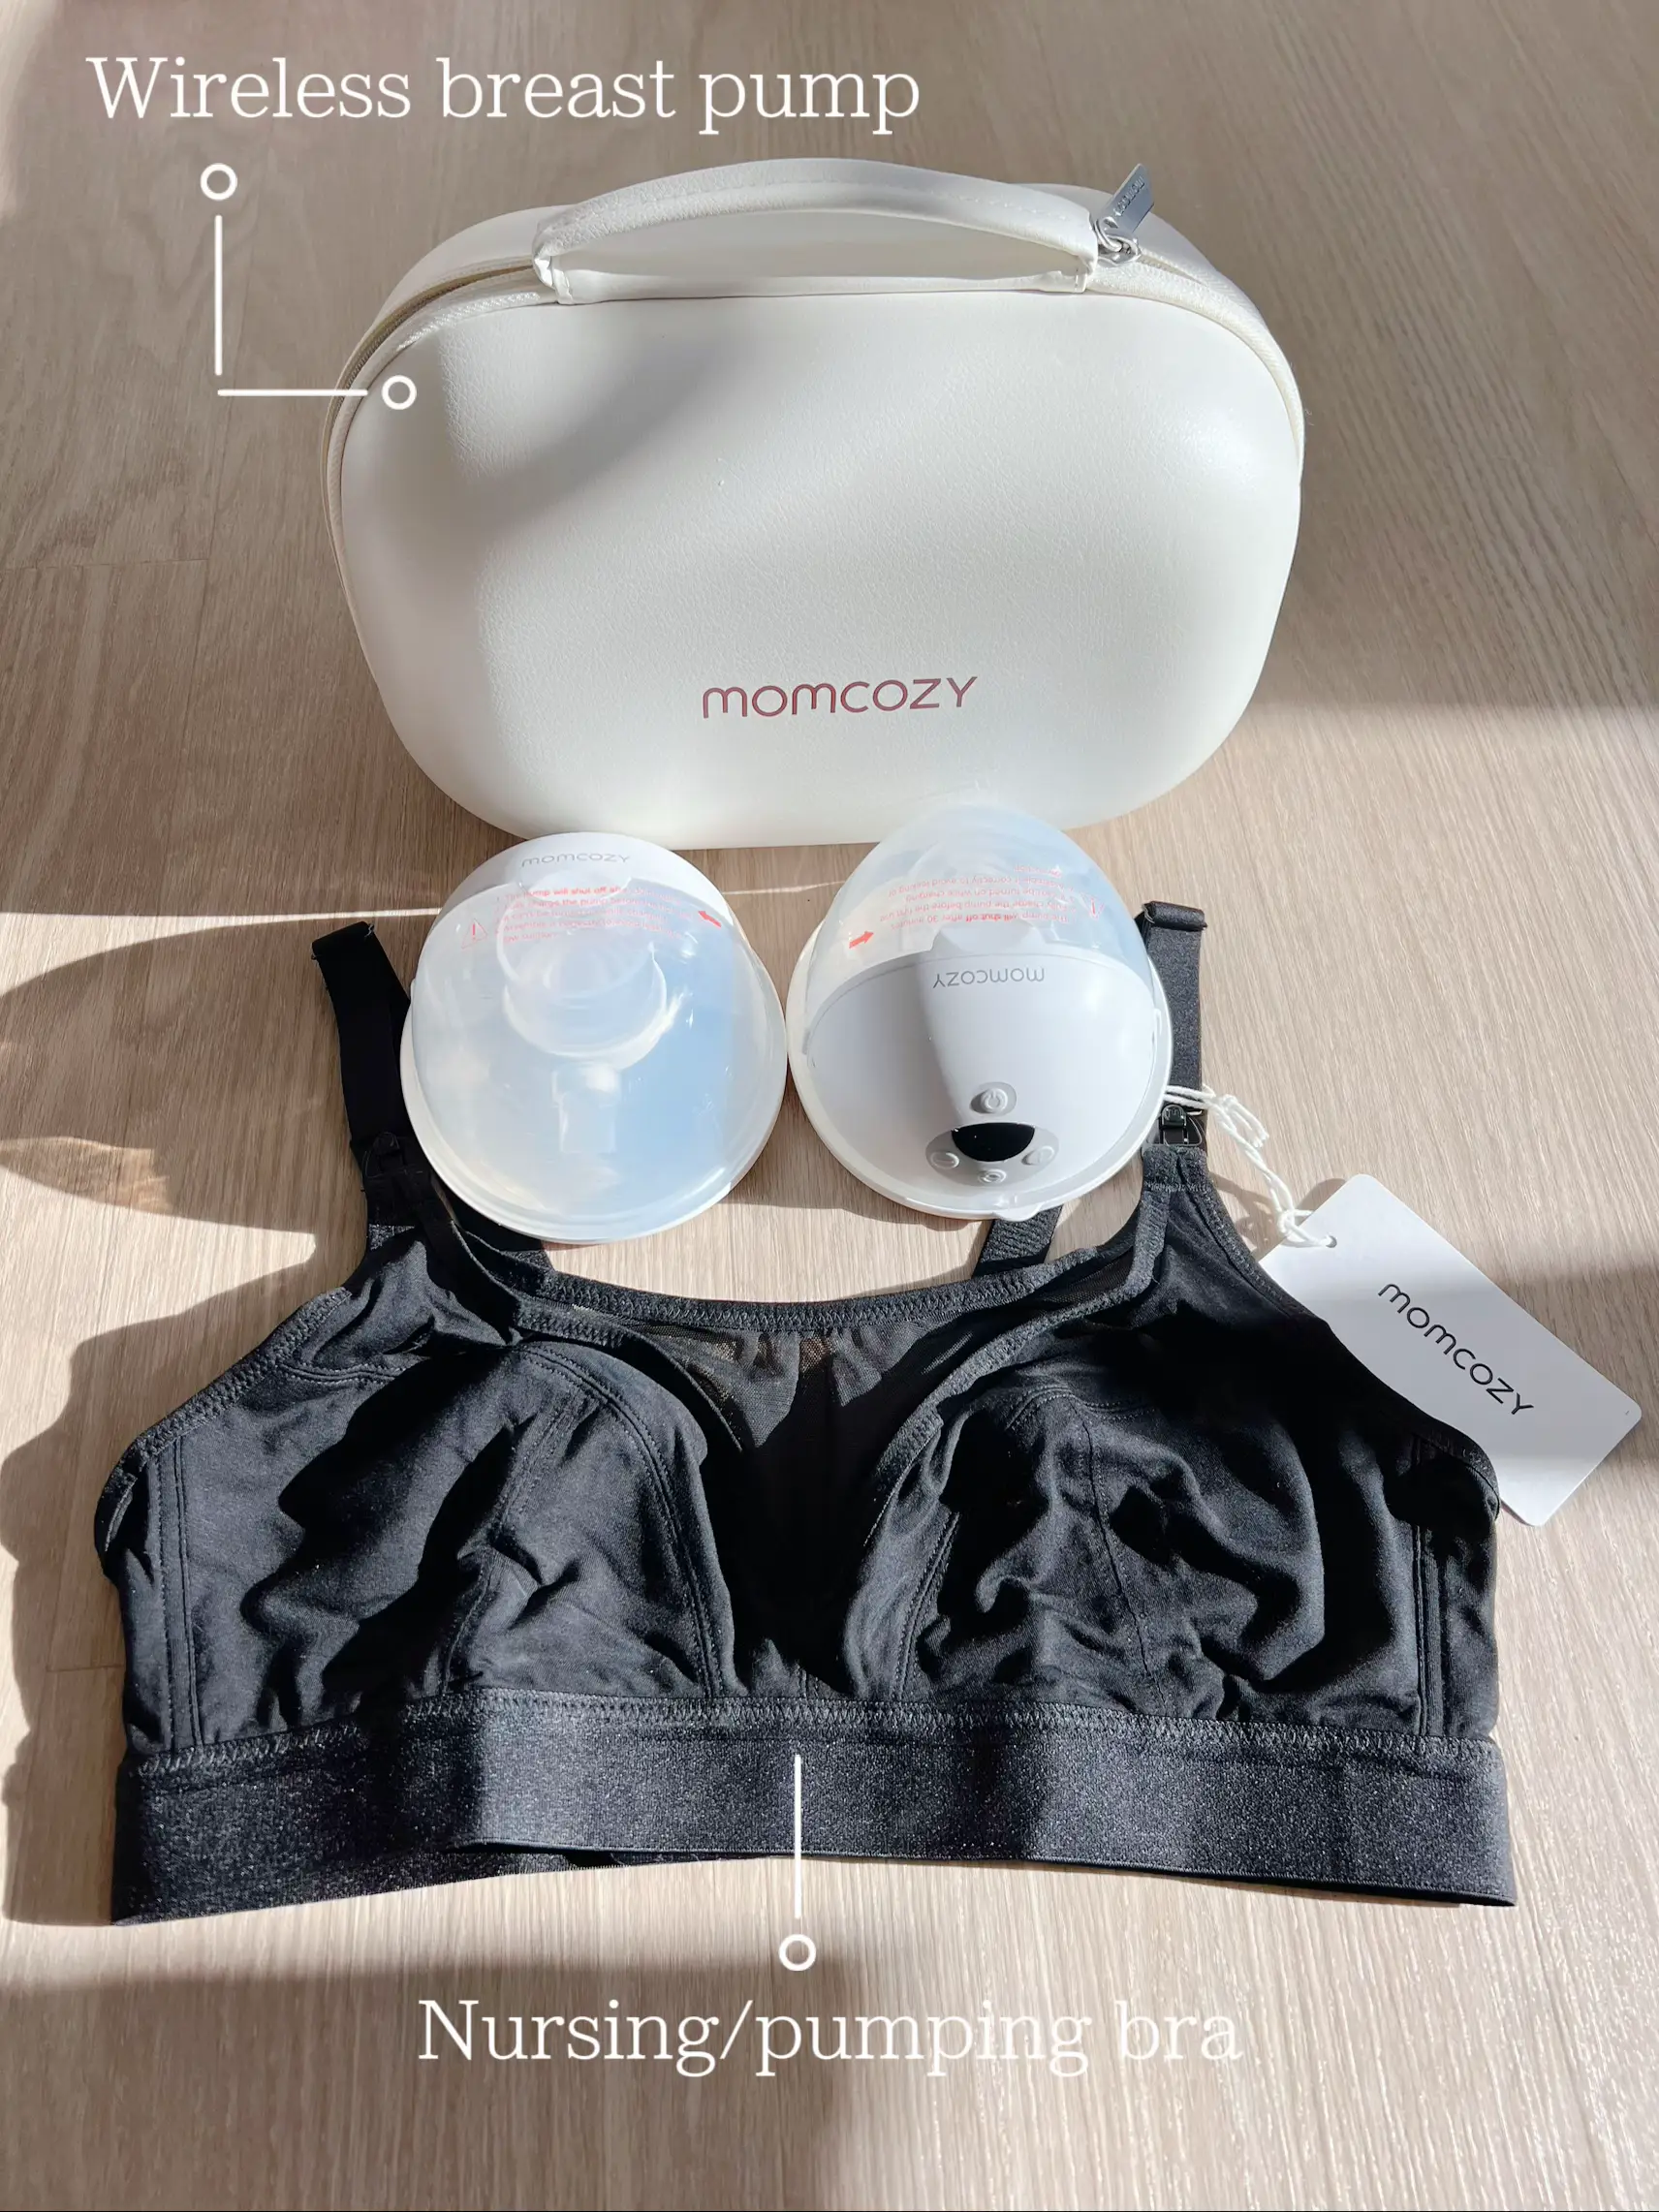 New MomCozy bra review! 🤩 get an extra Black Friday discount on